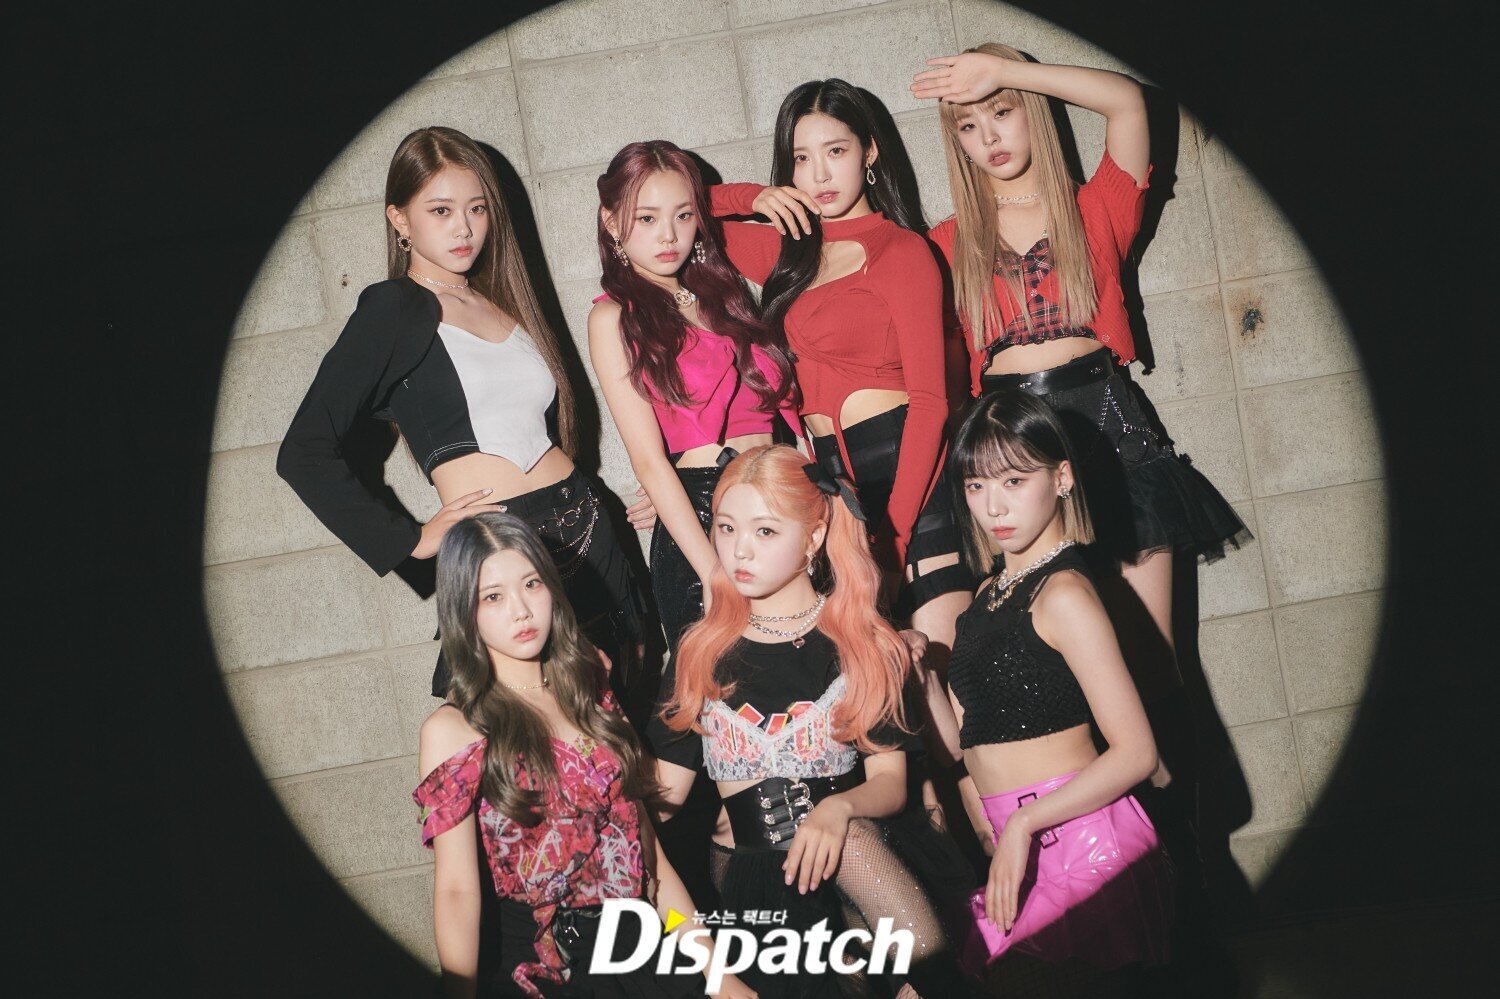 220608 CLASS:y - 'CLASSY' Promotion Photoshoot by Dispatch | kpopping